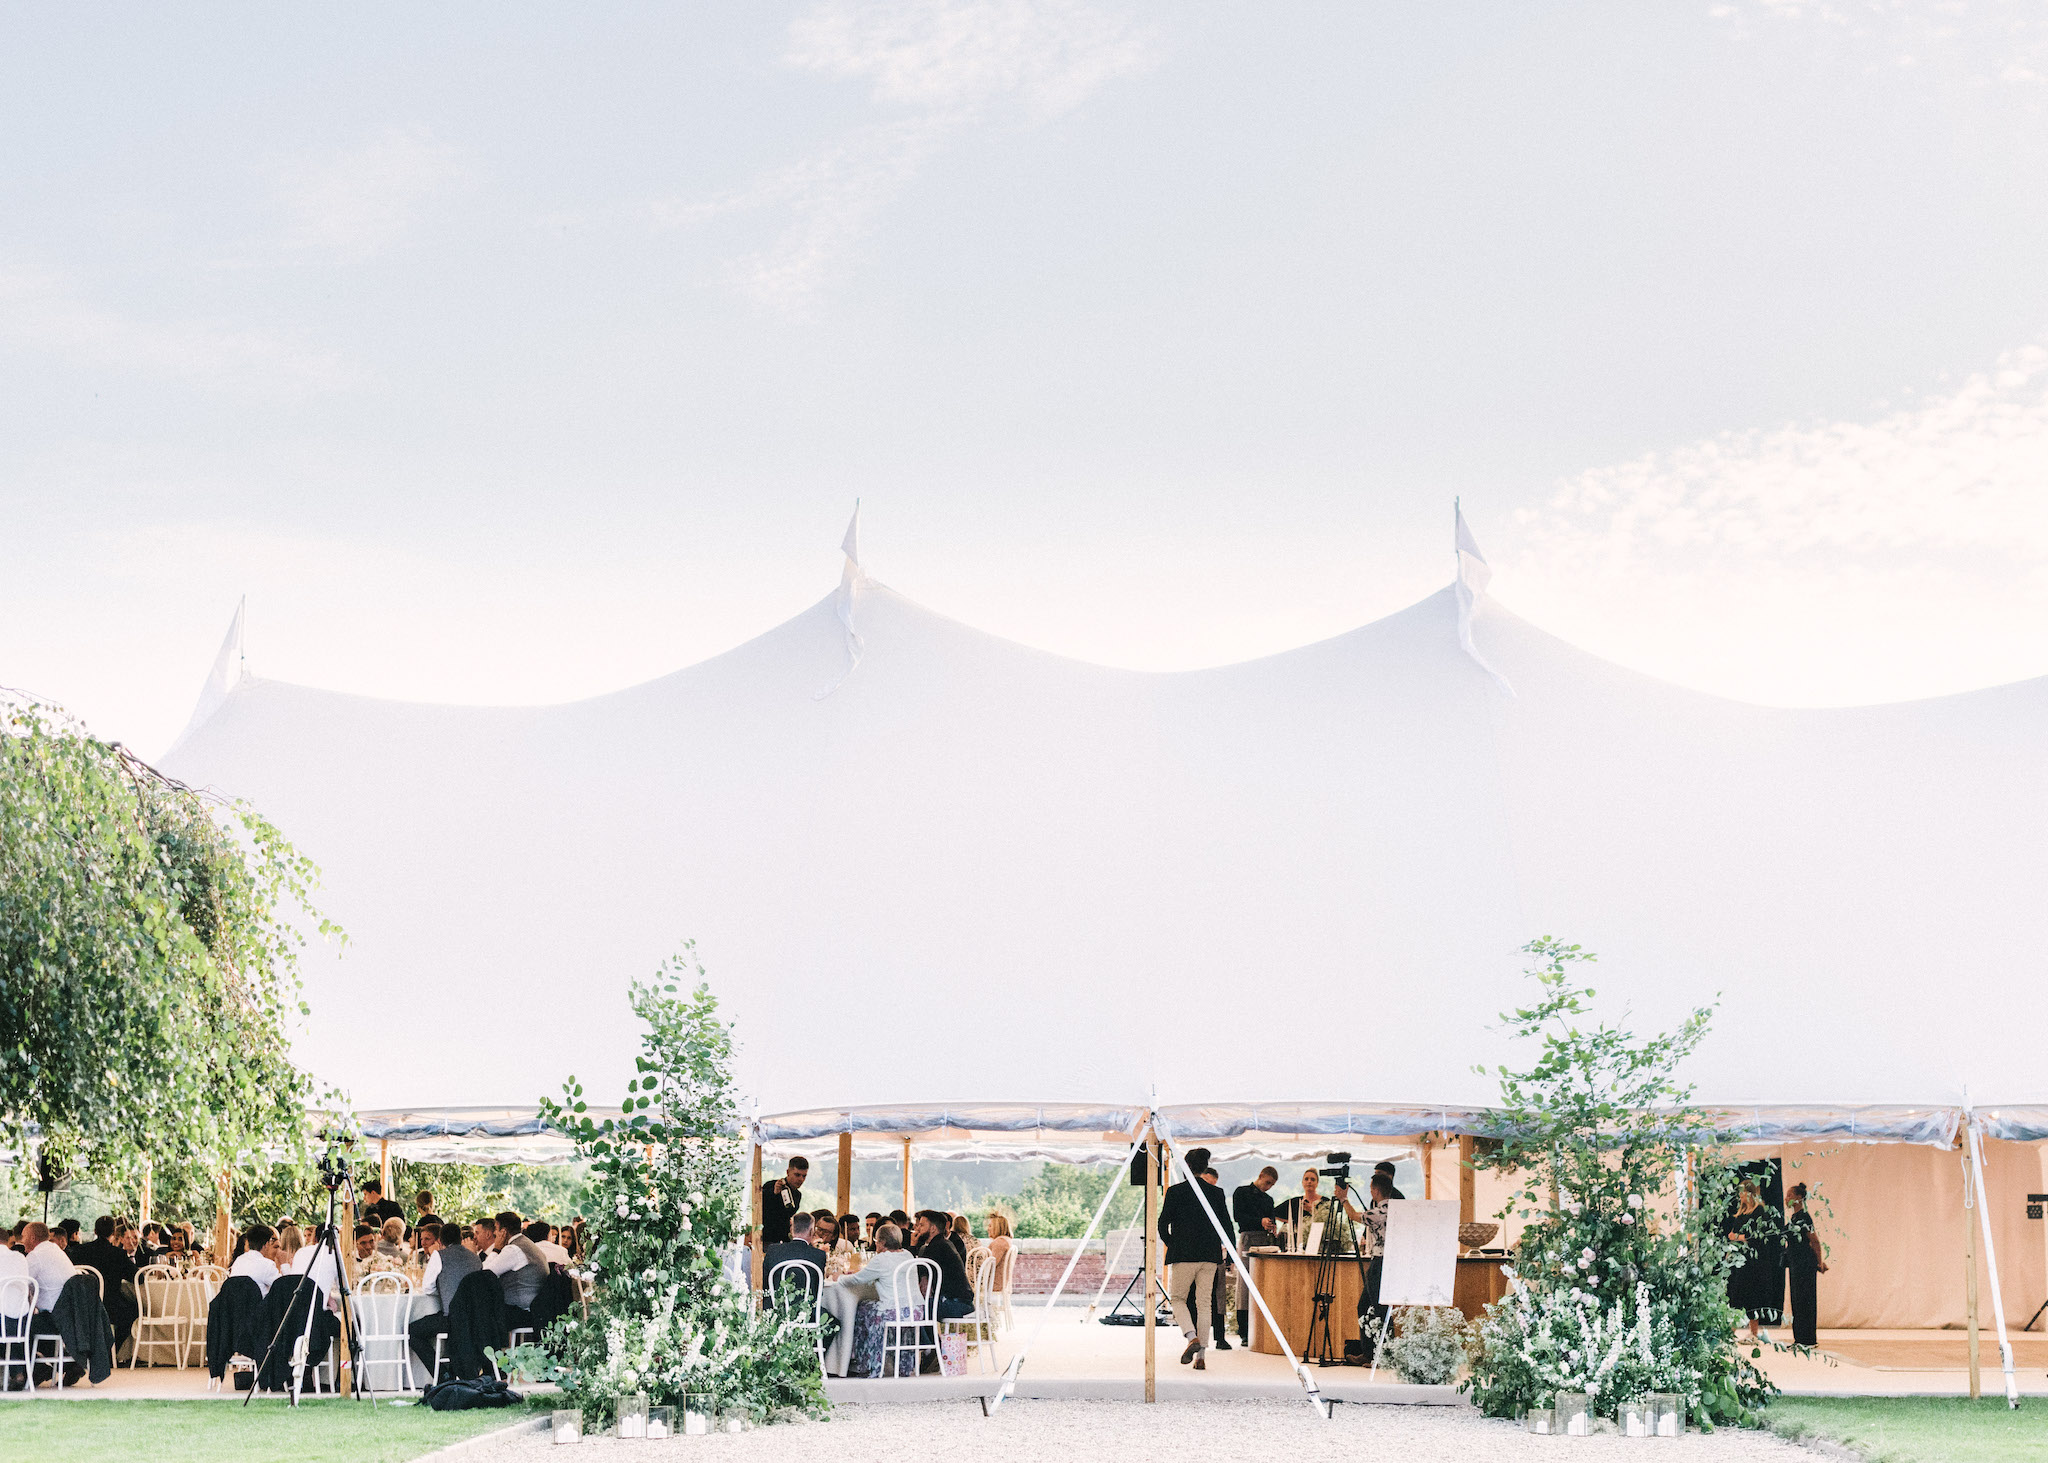 Planning an outdoor Sperry Wedding with Katrina Otter Weddings & The Sail Tent Company